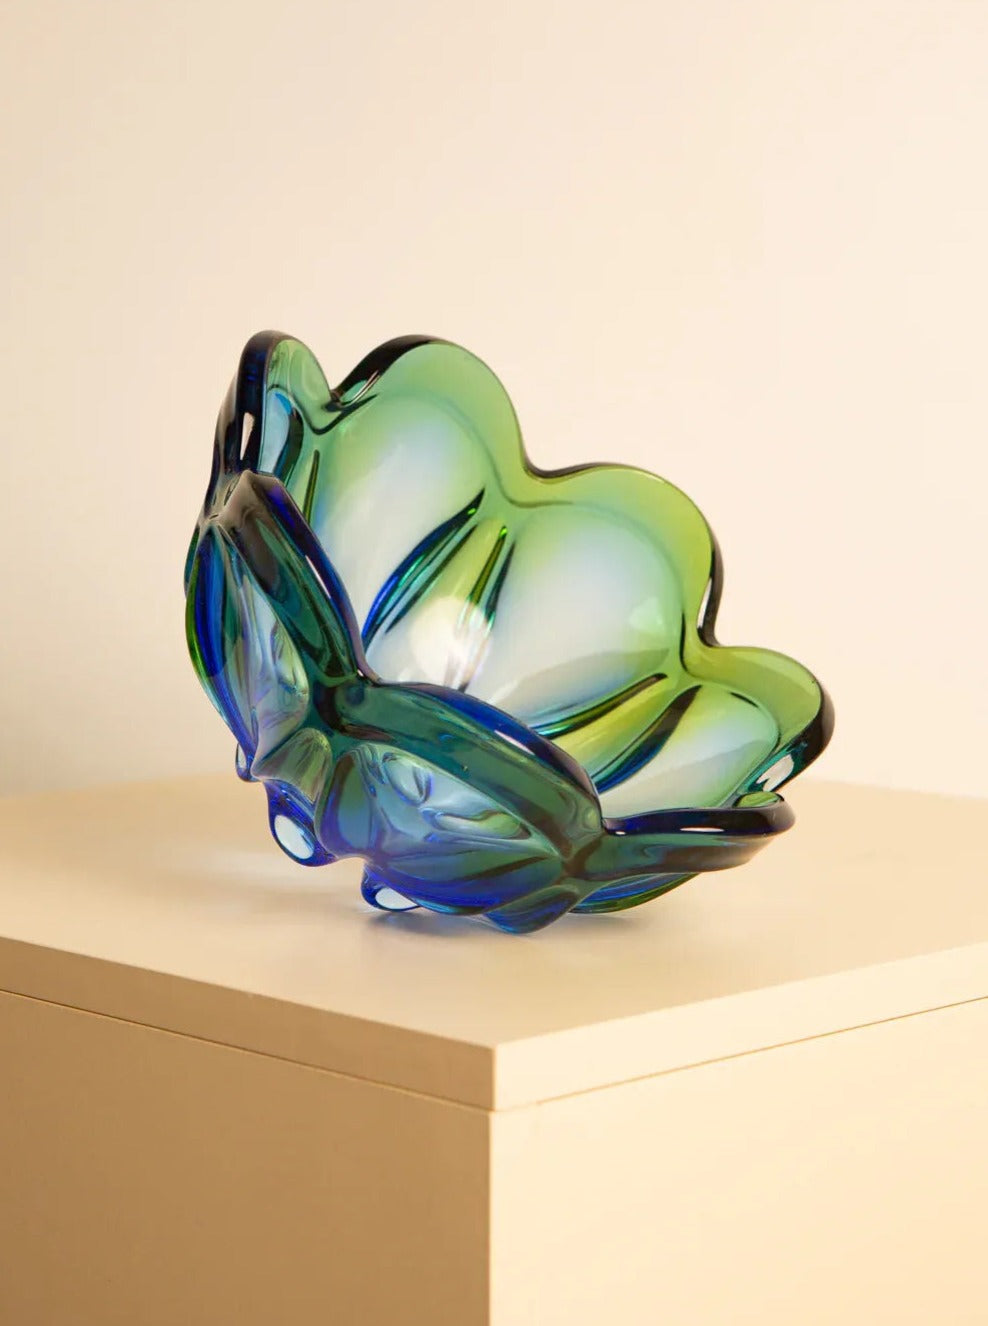 A large vide-poches "Flower" in 60's Murano glass by Treaptyque is displayed on a beige surface against a plain, light-colored background. The bowl, reminiscent of 1960s retro design, features a wavy, abstract shape with petal-like edges, showcasing exquisite Italian craftsmanship.